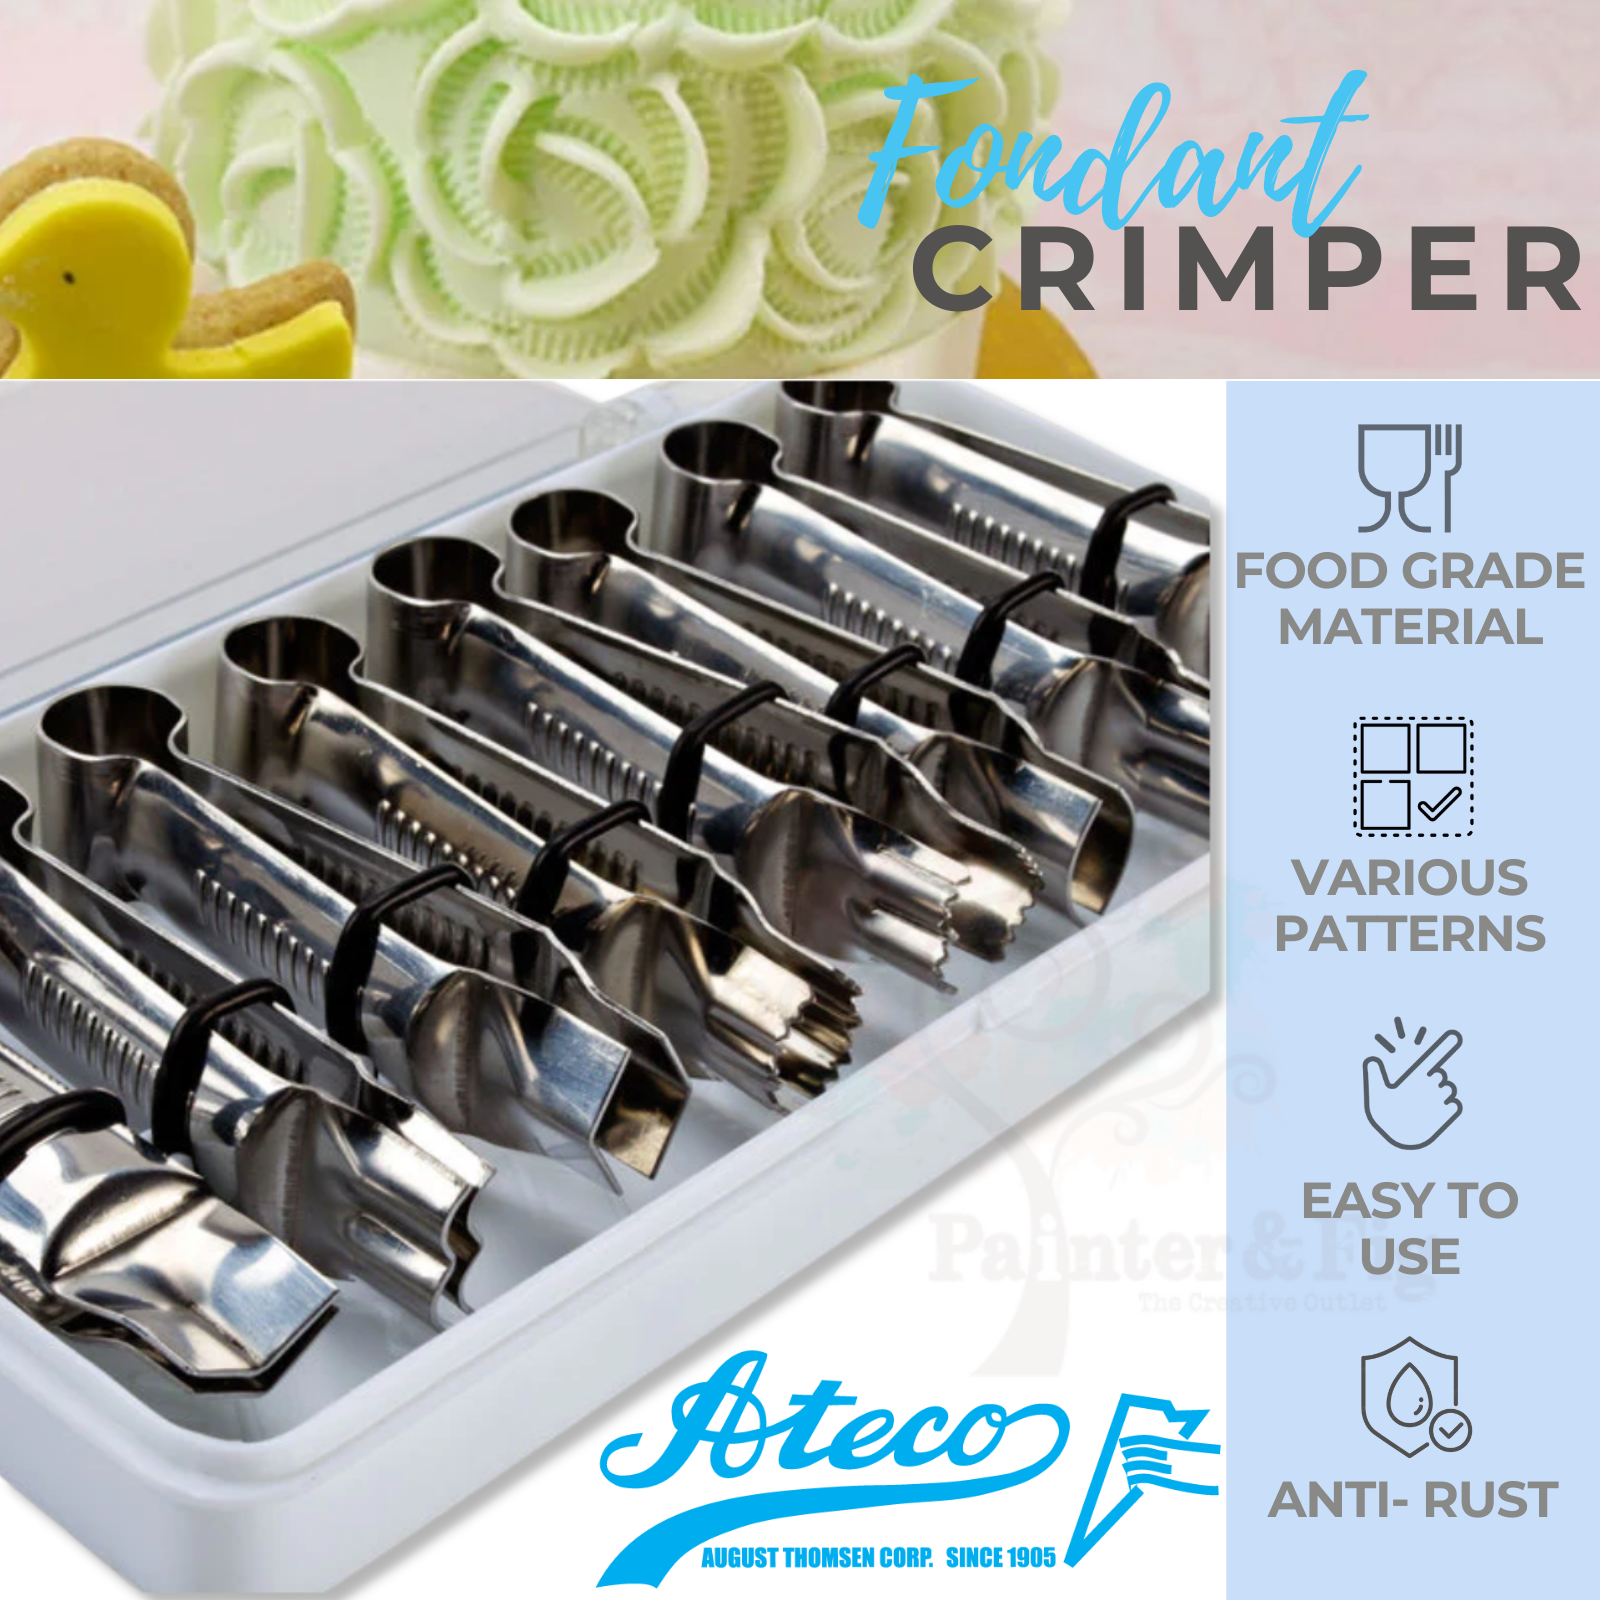 Ateco 8-Piece Crimper Tool Set Stainless Steel Scallops, Curves, Serrated Heart